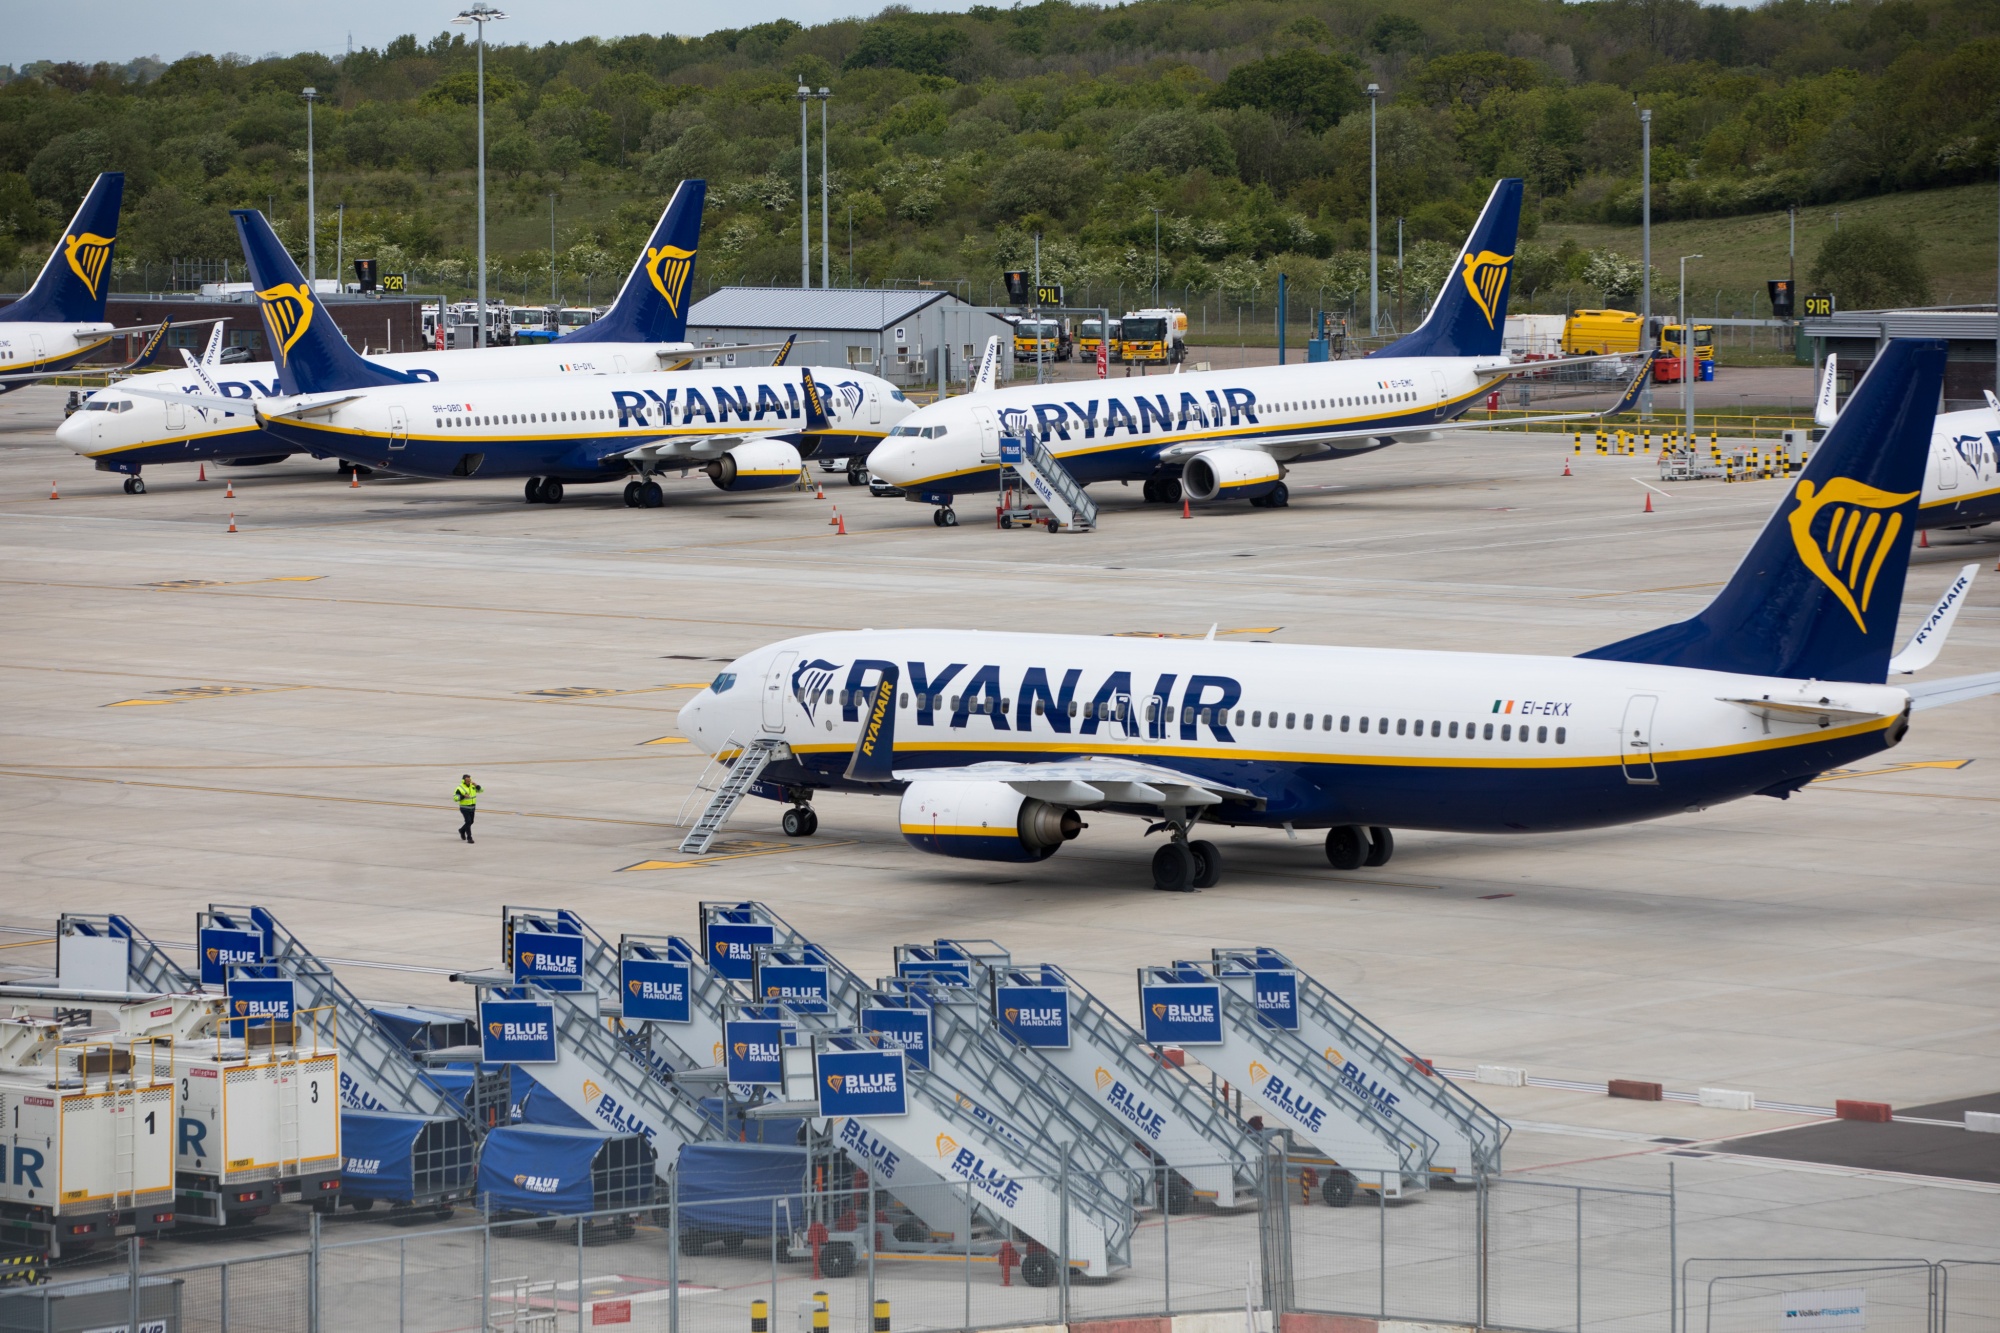 Ryanair Holdings Plc Cuts 3,000 Jobs, Challenges $33 Billion in State Aid
